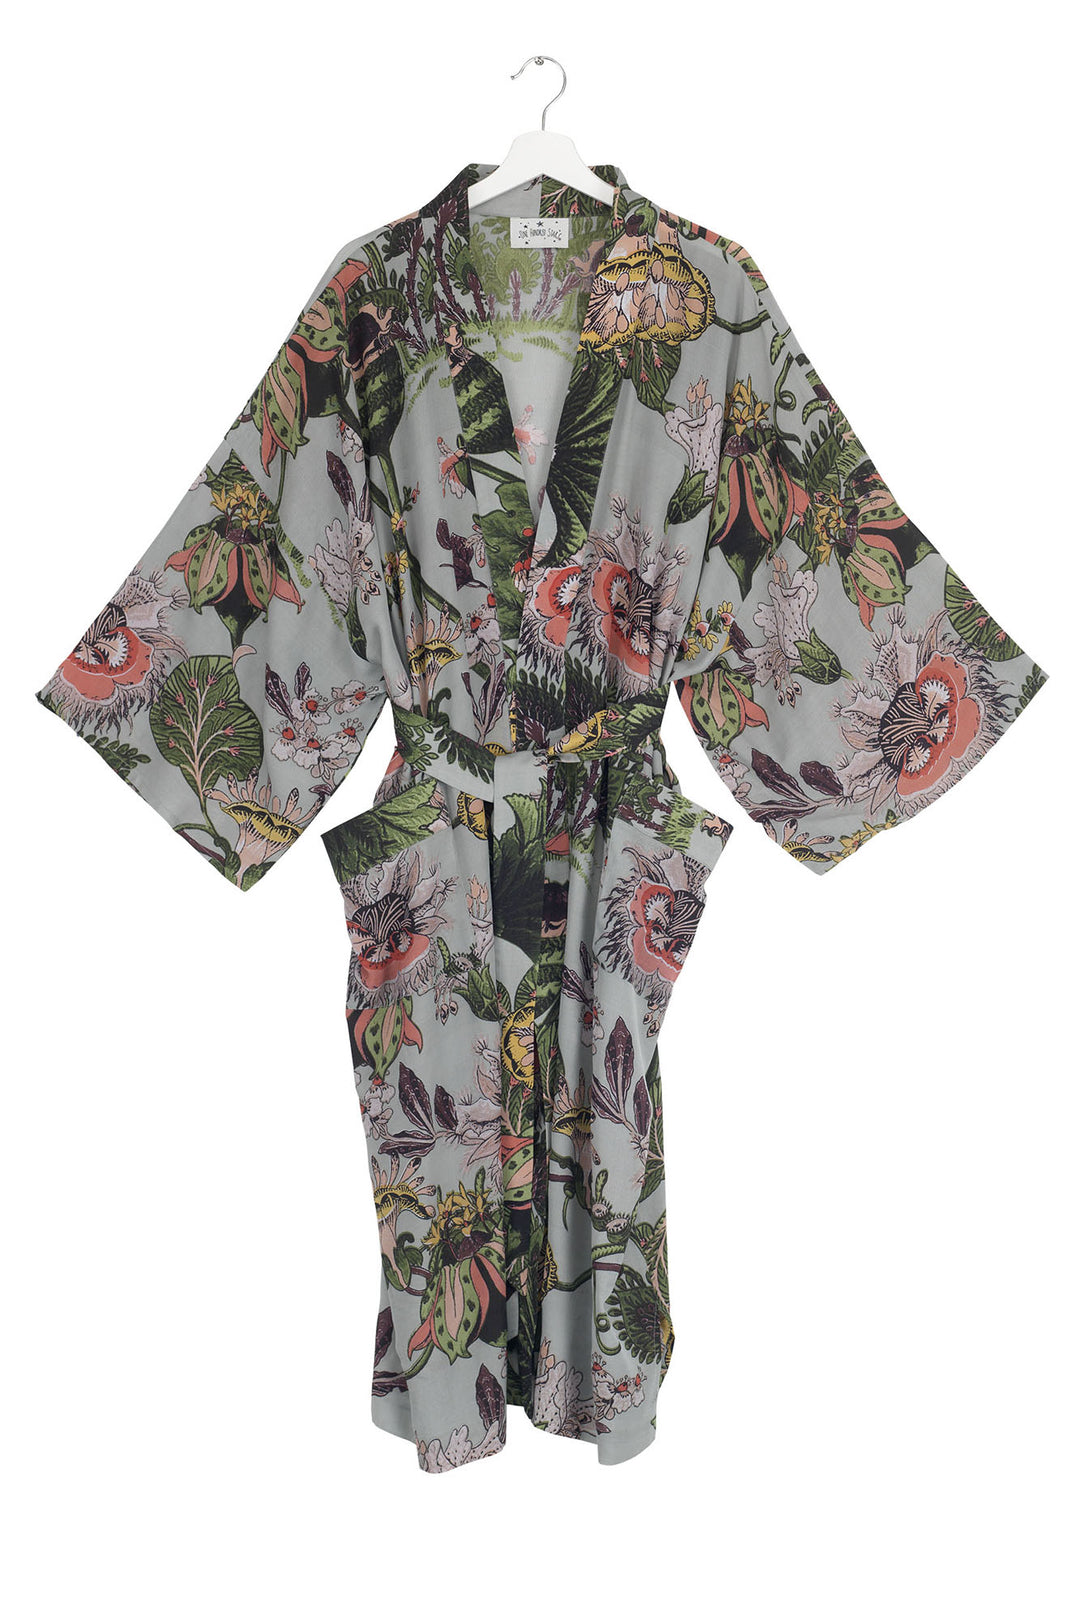 One Hundred Stars Eccentric Blooms long kimono in Putty features prominent psychedelic florals and oversized seedpods making delicate use of neon greens and fluoro pinks teamed with a rich putty background.